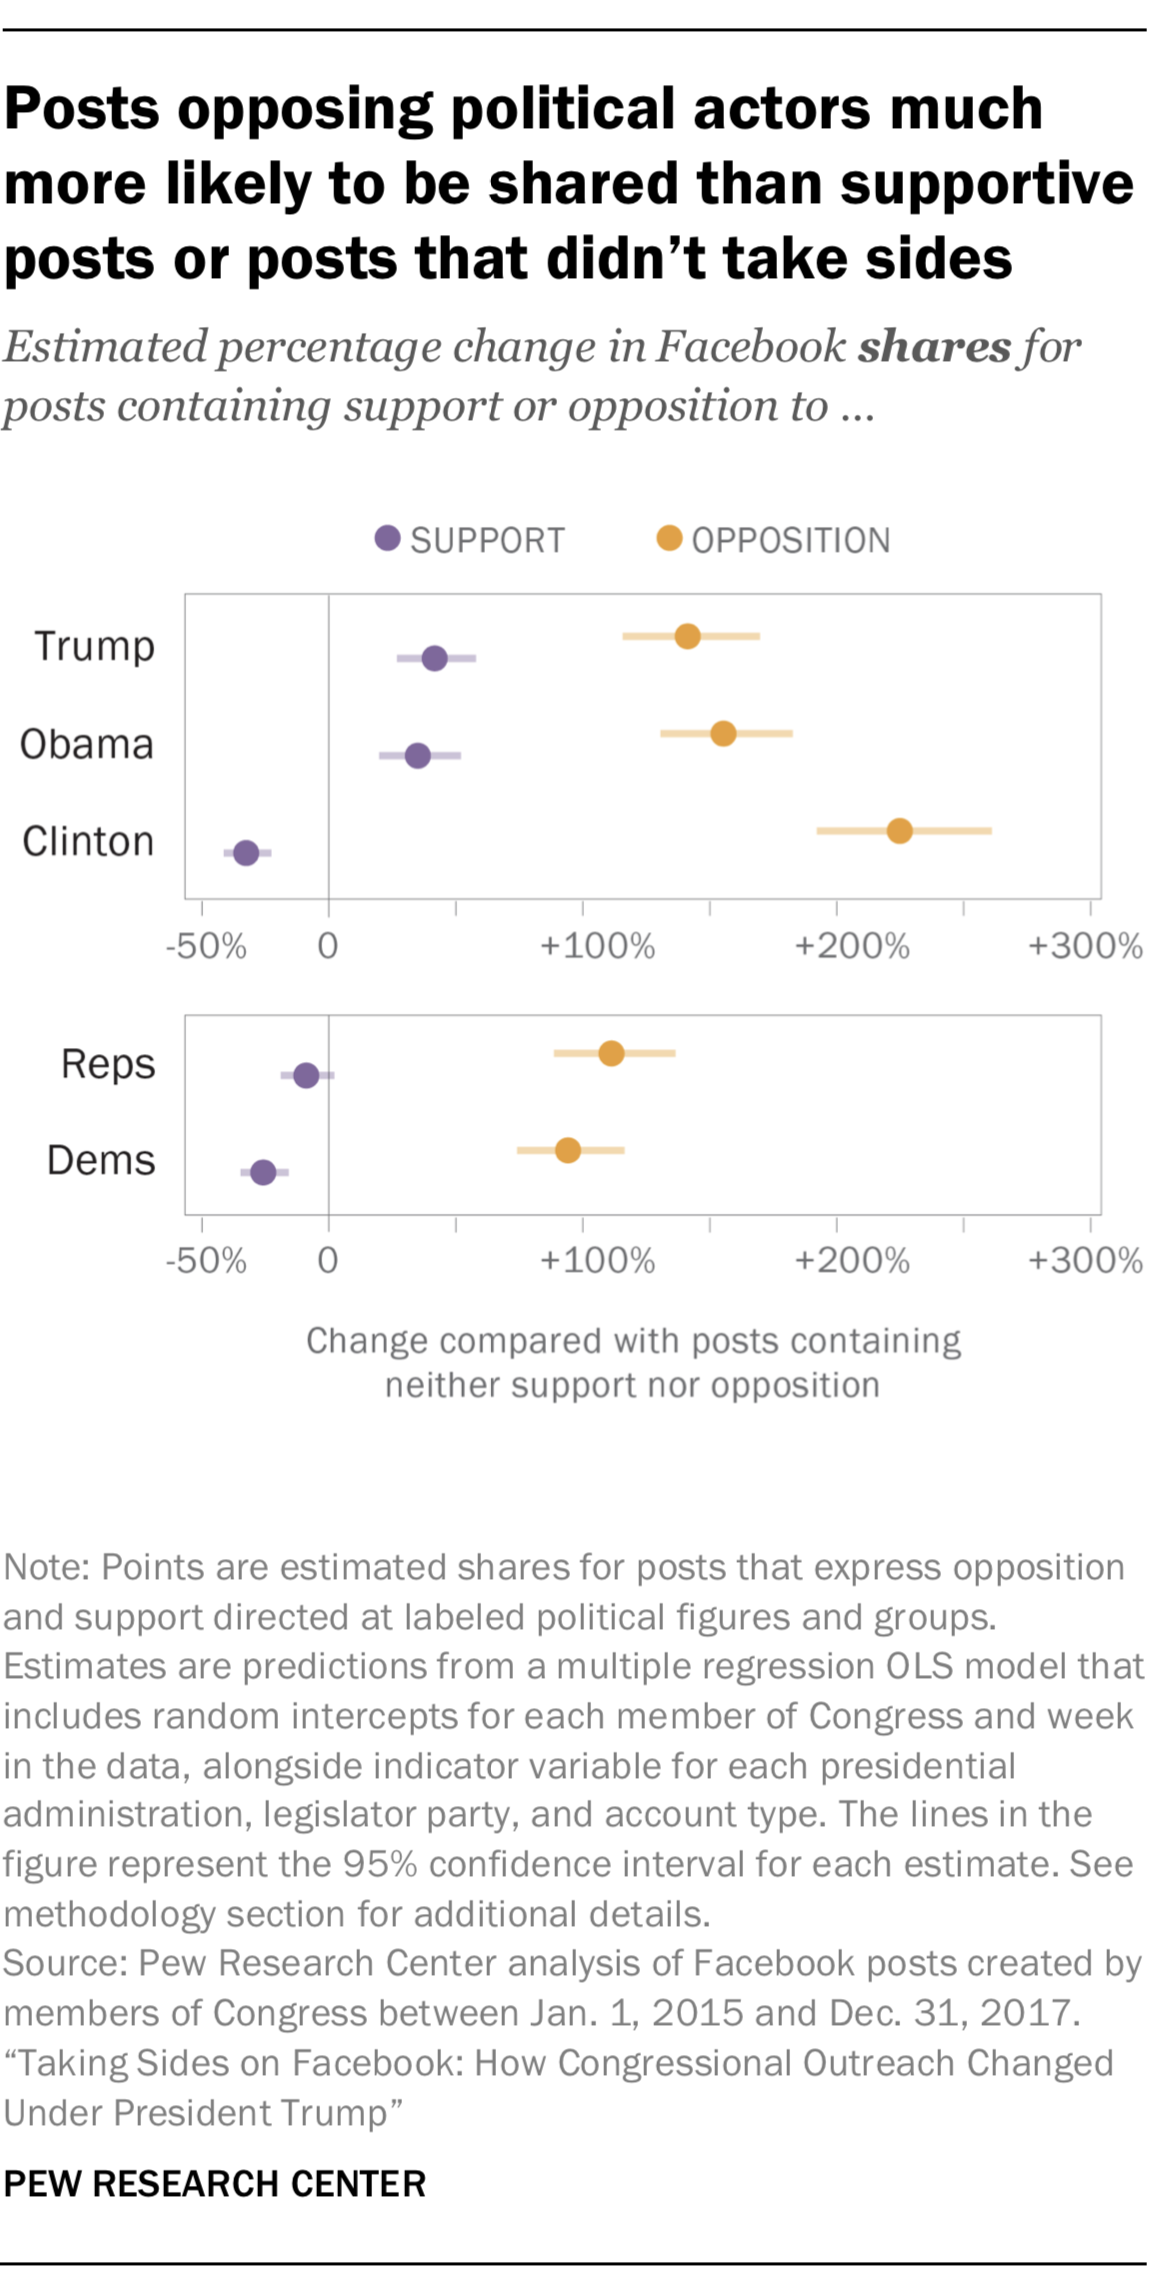 Posts opposing political actors much more likely to be shared than supportive posts or posts that didn’t take sides